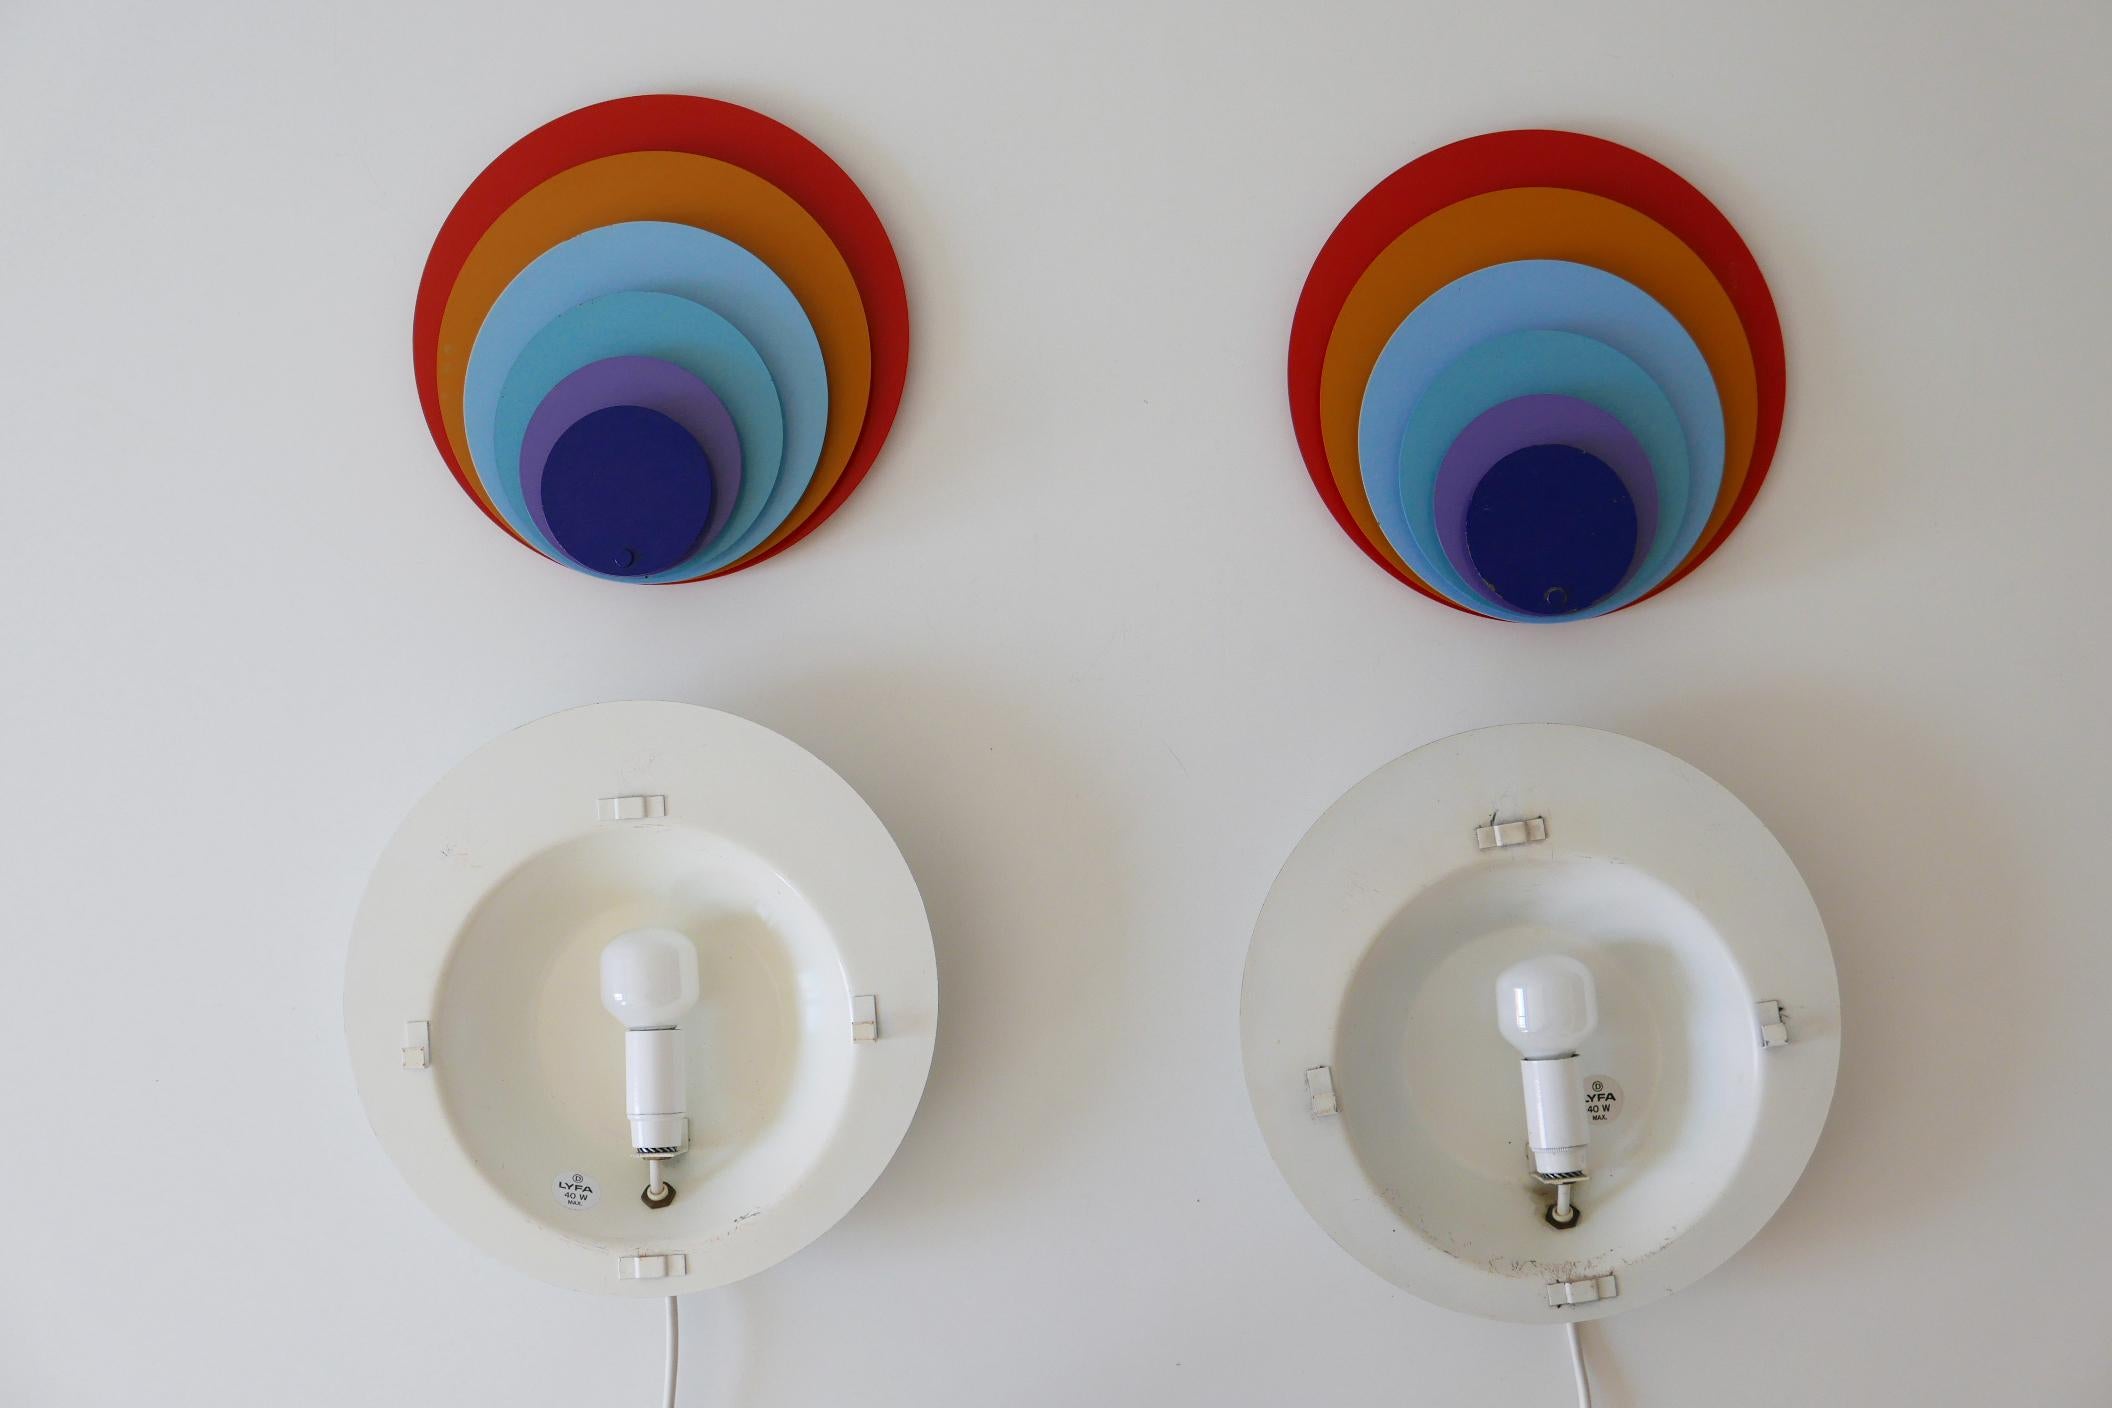 Set of Two Peacock Wall Lamps or Sconces by Bent Karlby for Lyfa, 1974, Denmark 11